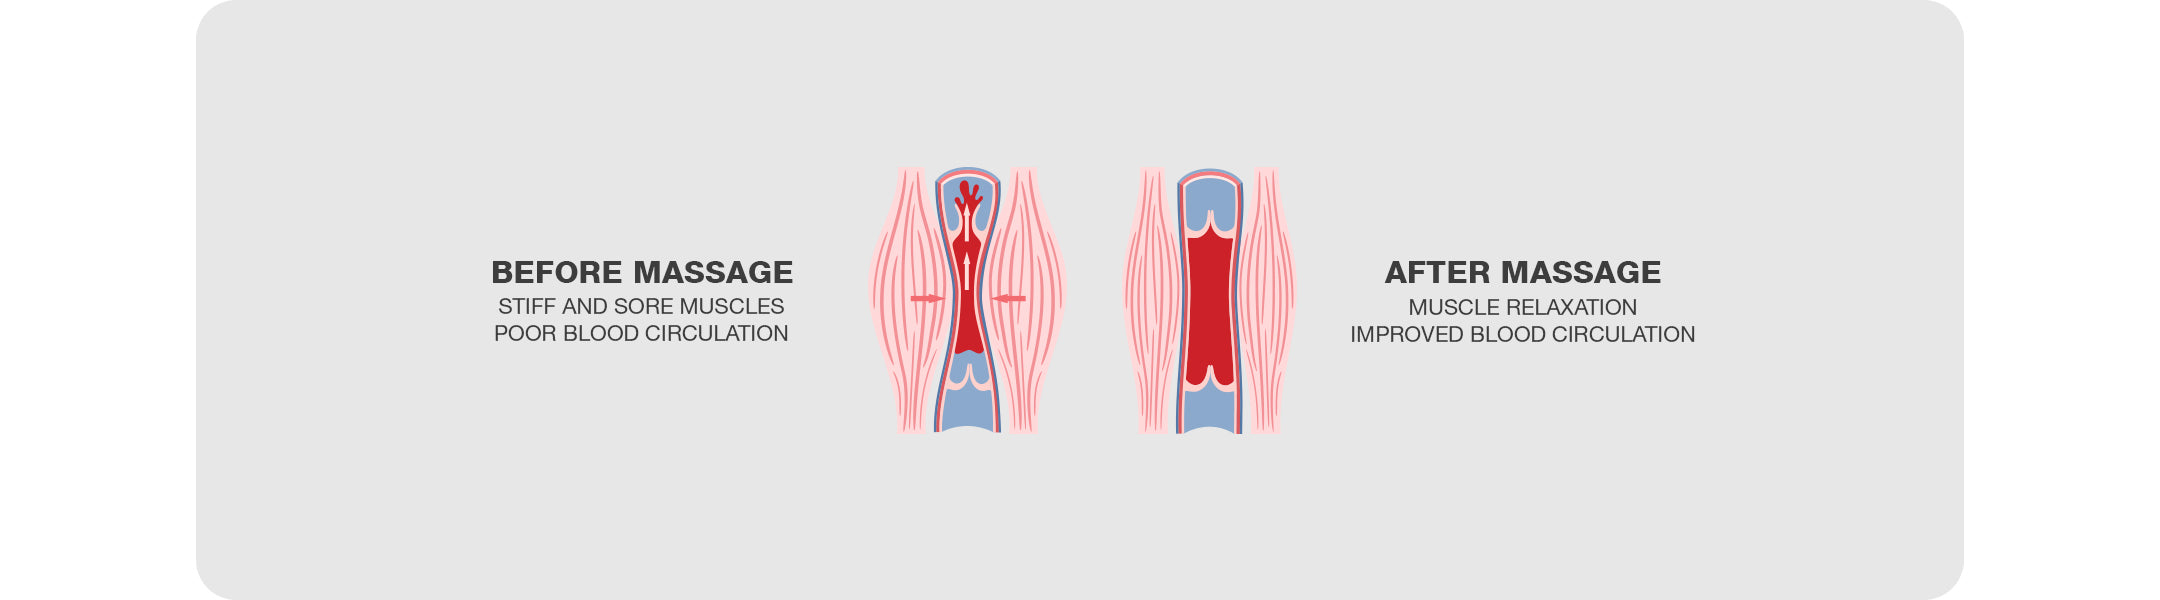 comparison of muscle tissue before and after massage